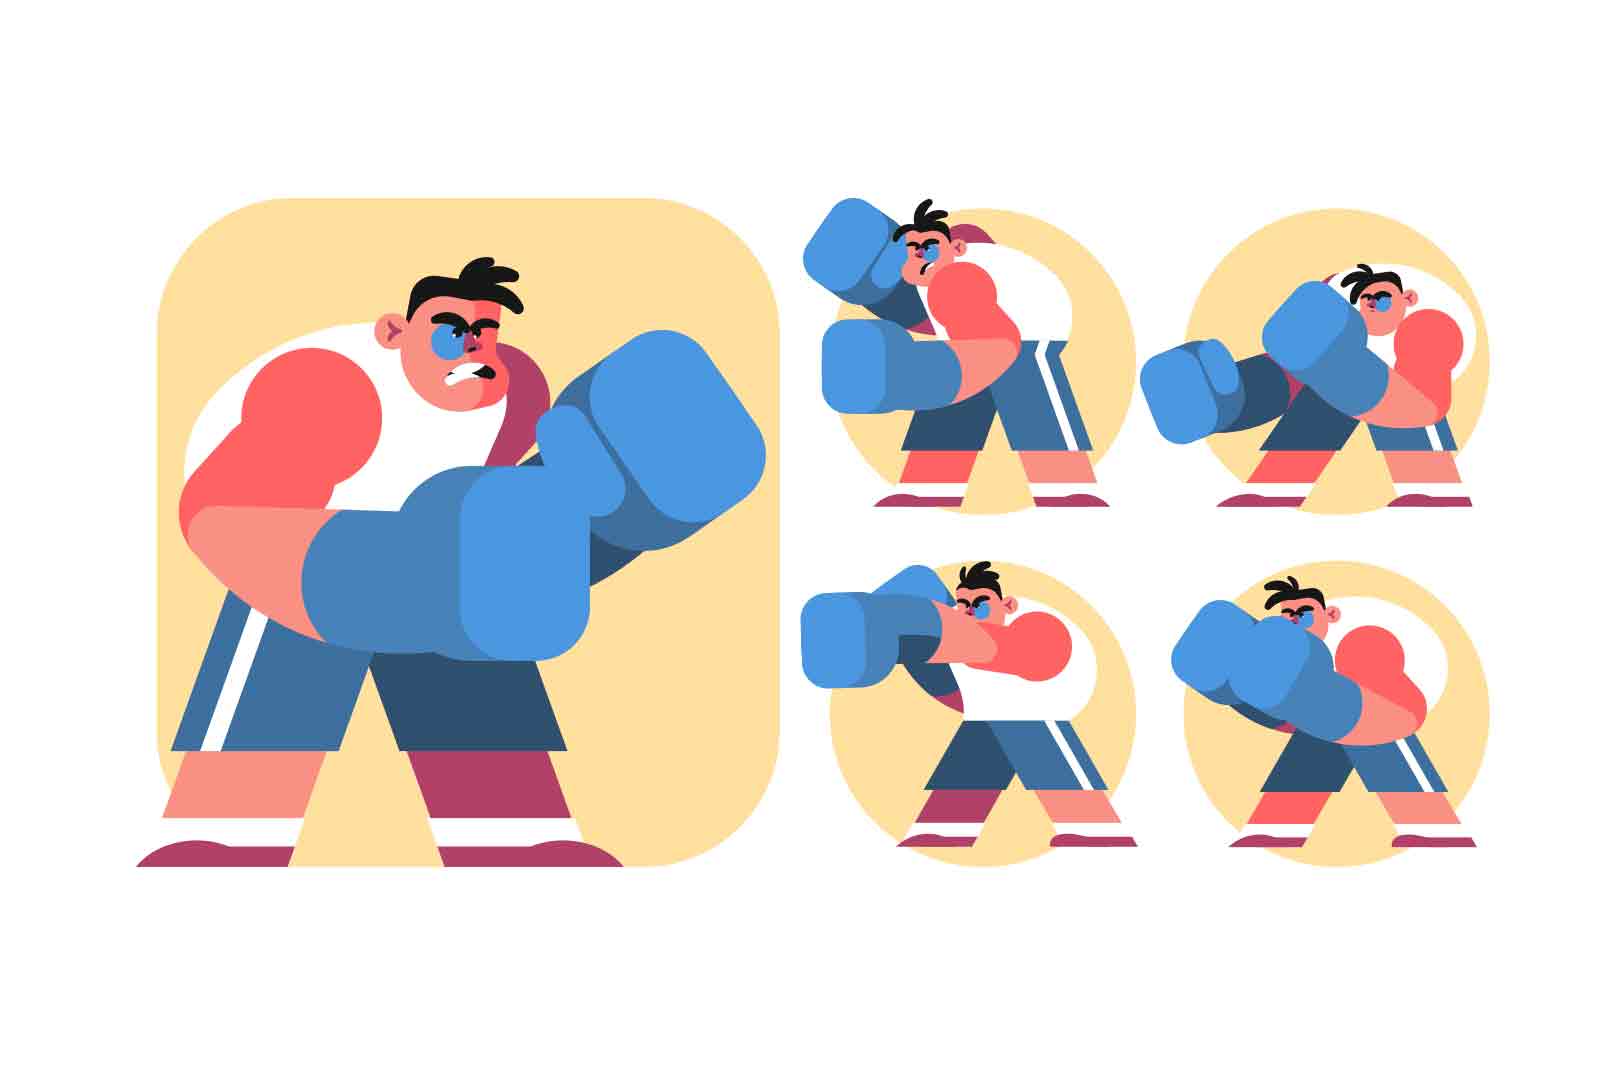 Boxer in Different Poses, vector illustration. Man wearing blue gloves, red shorts, and a blue tank top demonstrates boxing moves.